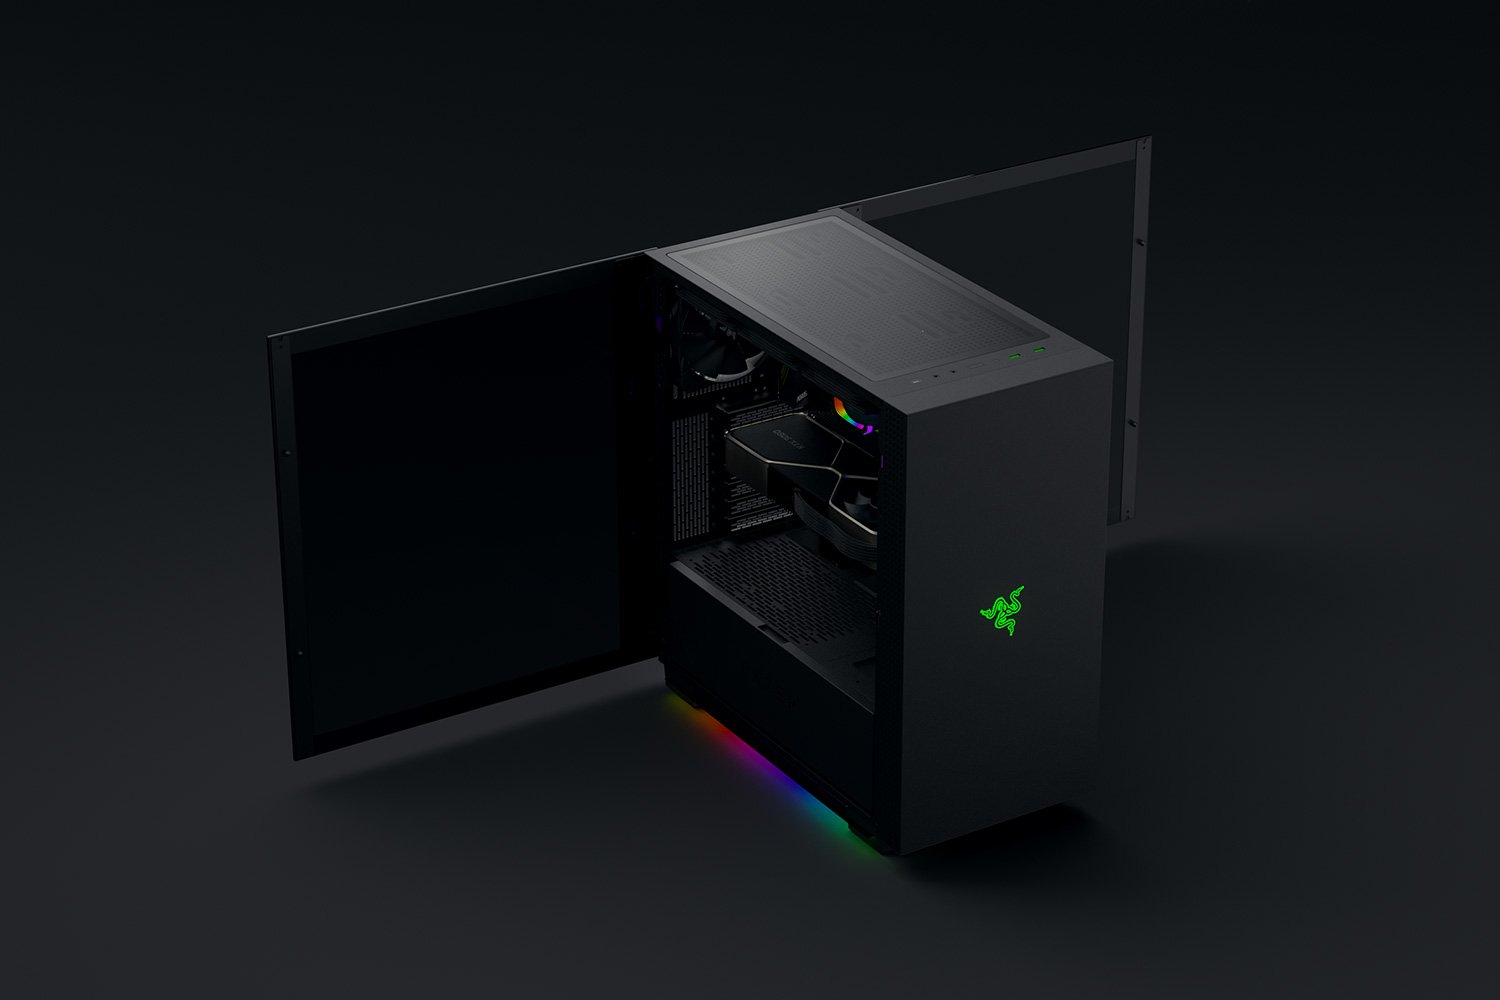 Ventilated Top Panel Classic Black Built-in Cable Management Tomahawk ATX Mid-Tower Gaming Chassis: Dual-Sided Tempered Glass Swivel Doors Chroma RGB Underglow Lighting